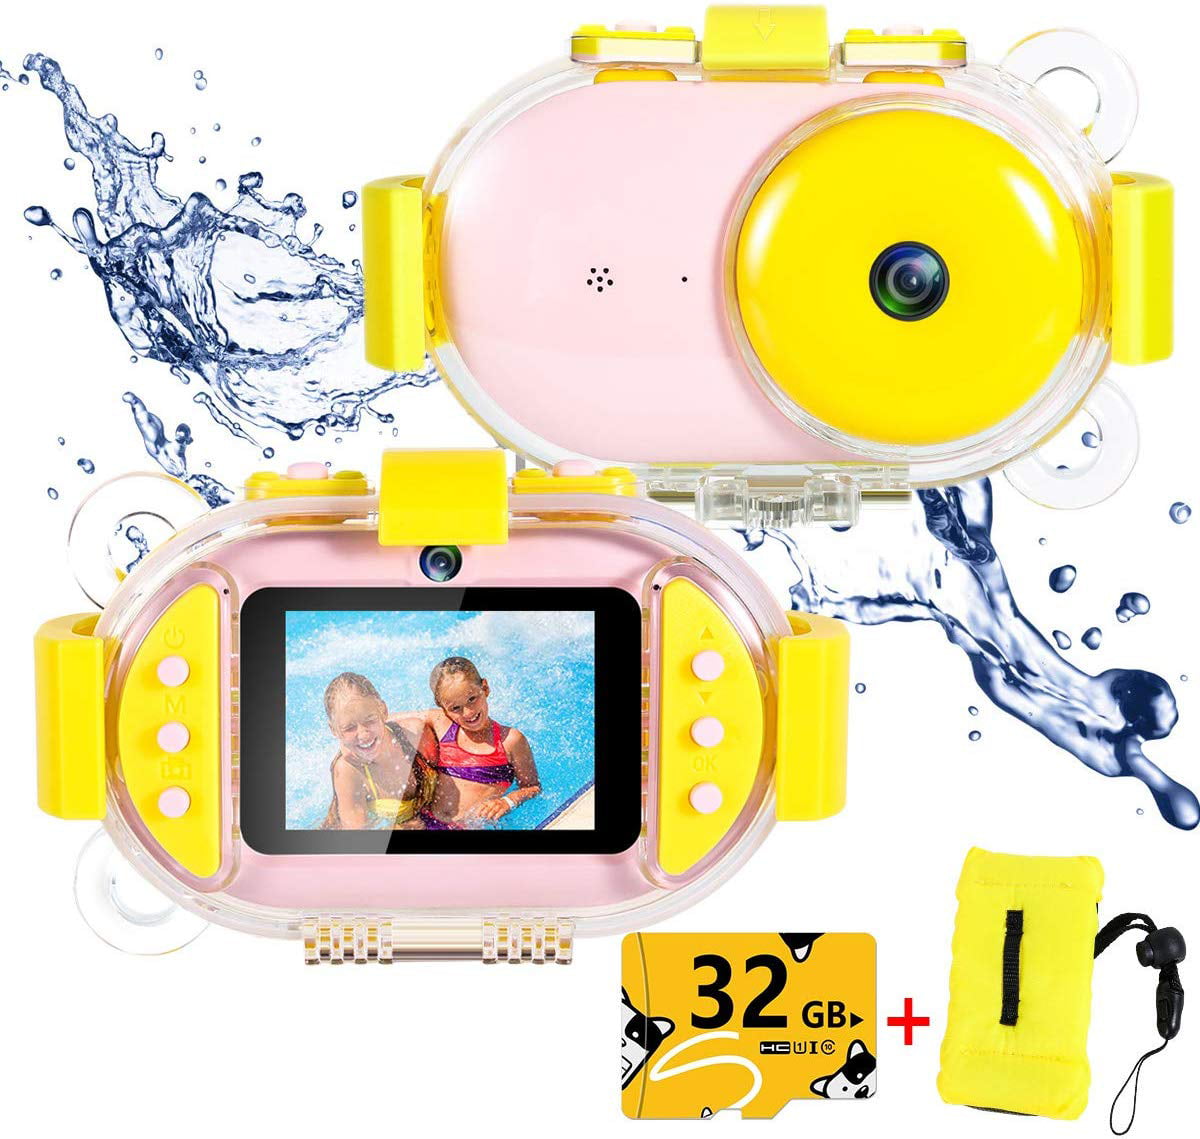 Kids Waterproof Camera Digital Camera for 4-10 Years Old Children 2.0 Inch LCD Display Yellow Easy to Use 12MP HD Underwater Action Camera Camcorder with 8X Digital Zoom 16G Micro SD Card 